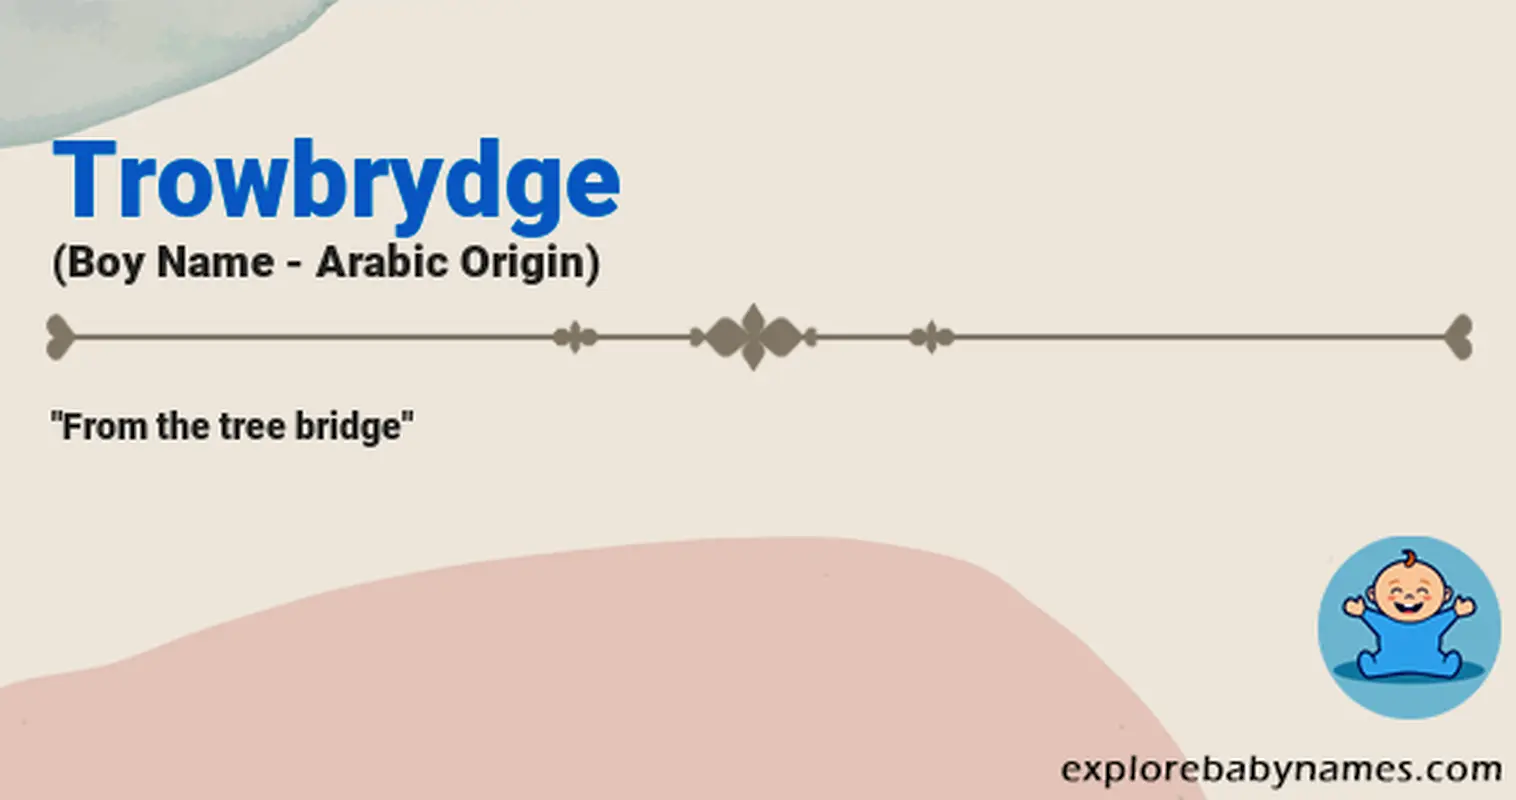 Meaning of Trowbrydge